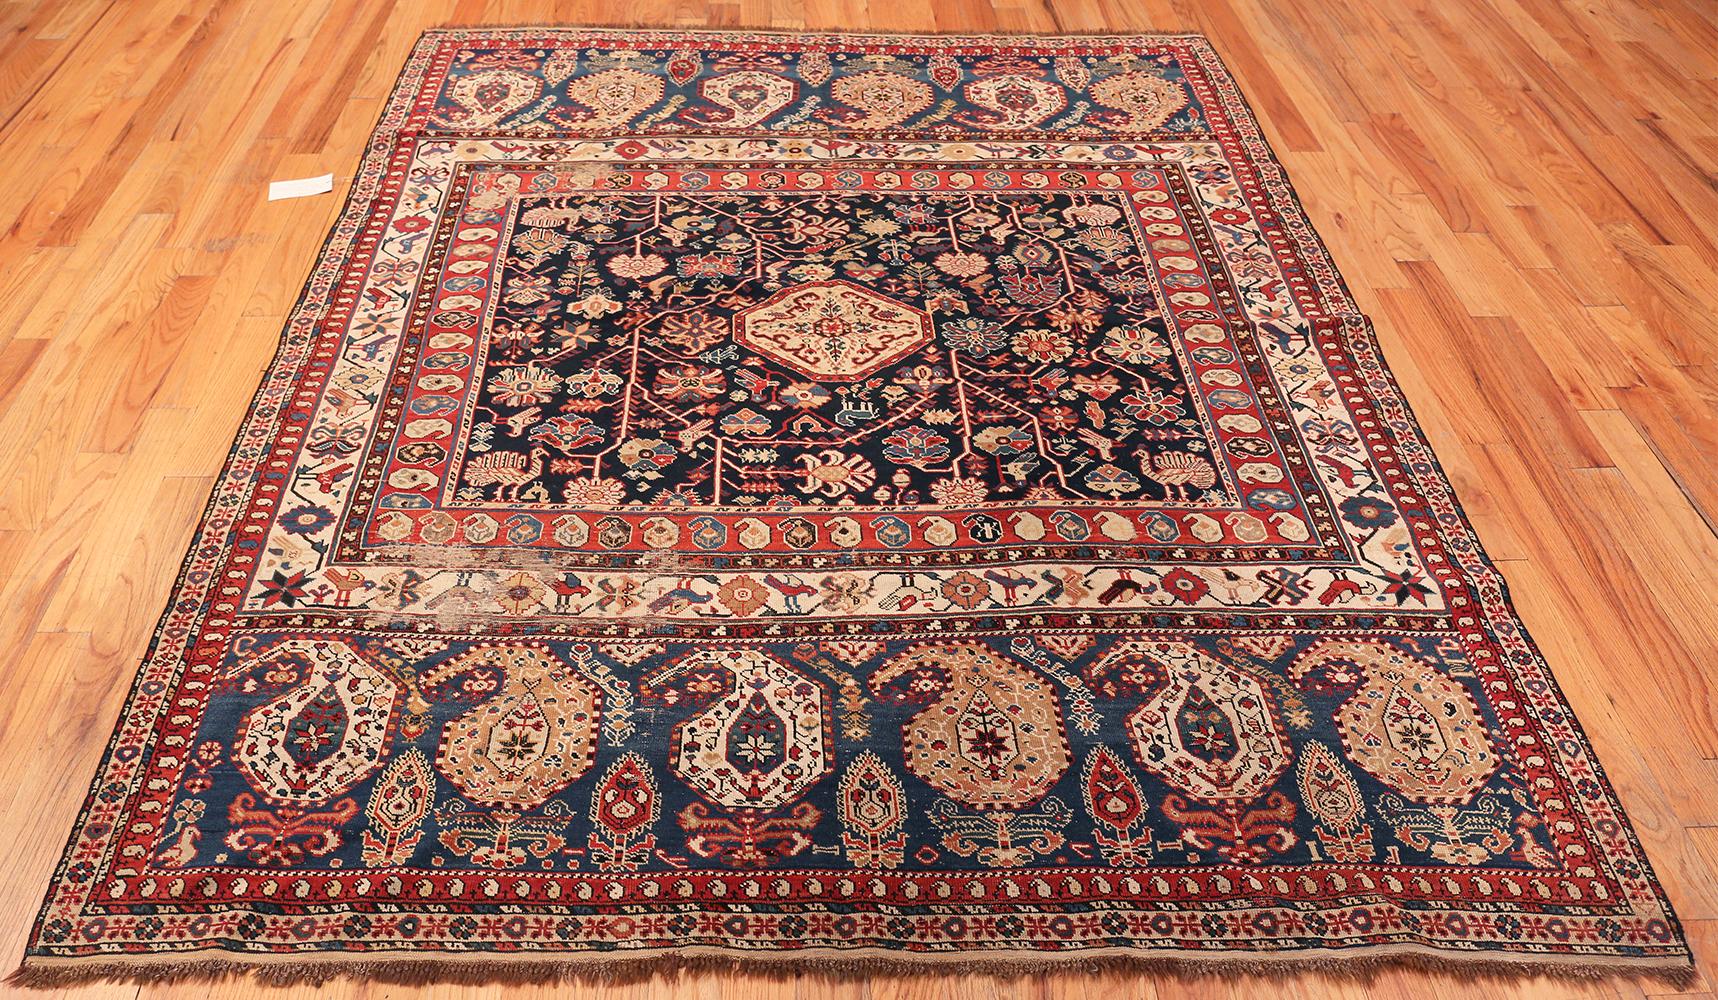 Wool Nazmiyal Collection Antique Caucasian Baku Khila Rug. 6 ft 7 in x 7 ft 10 in